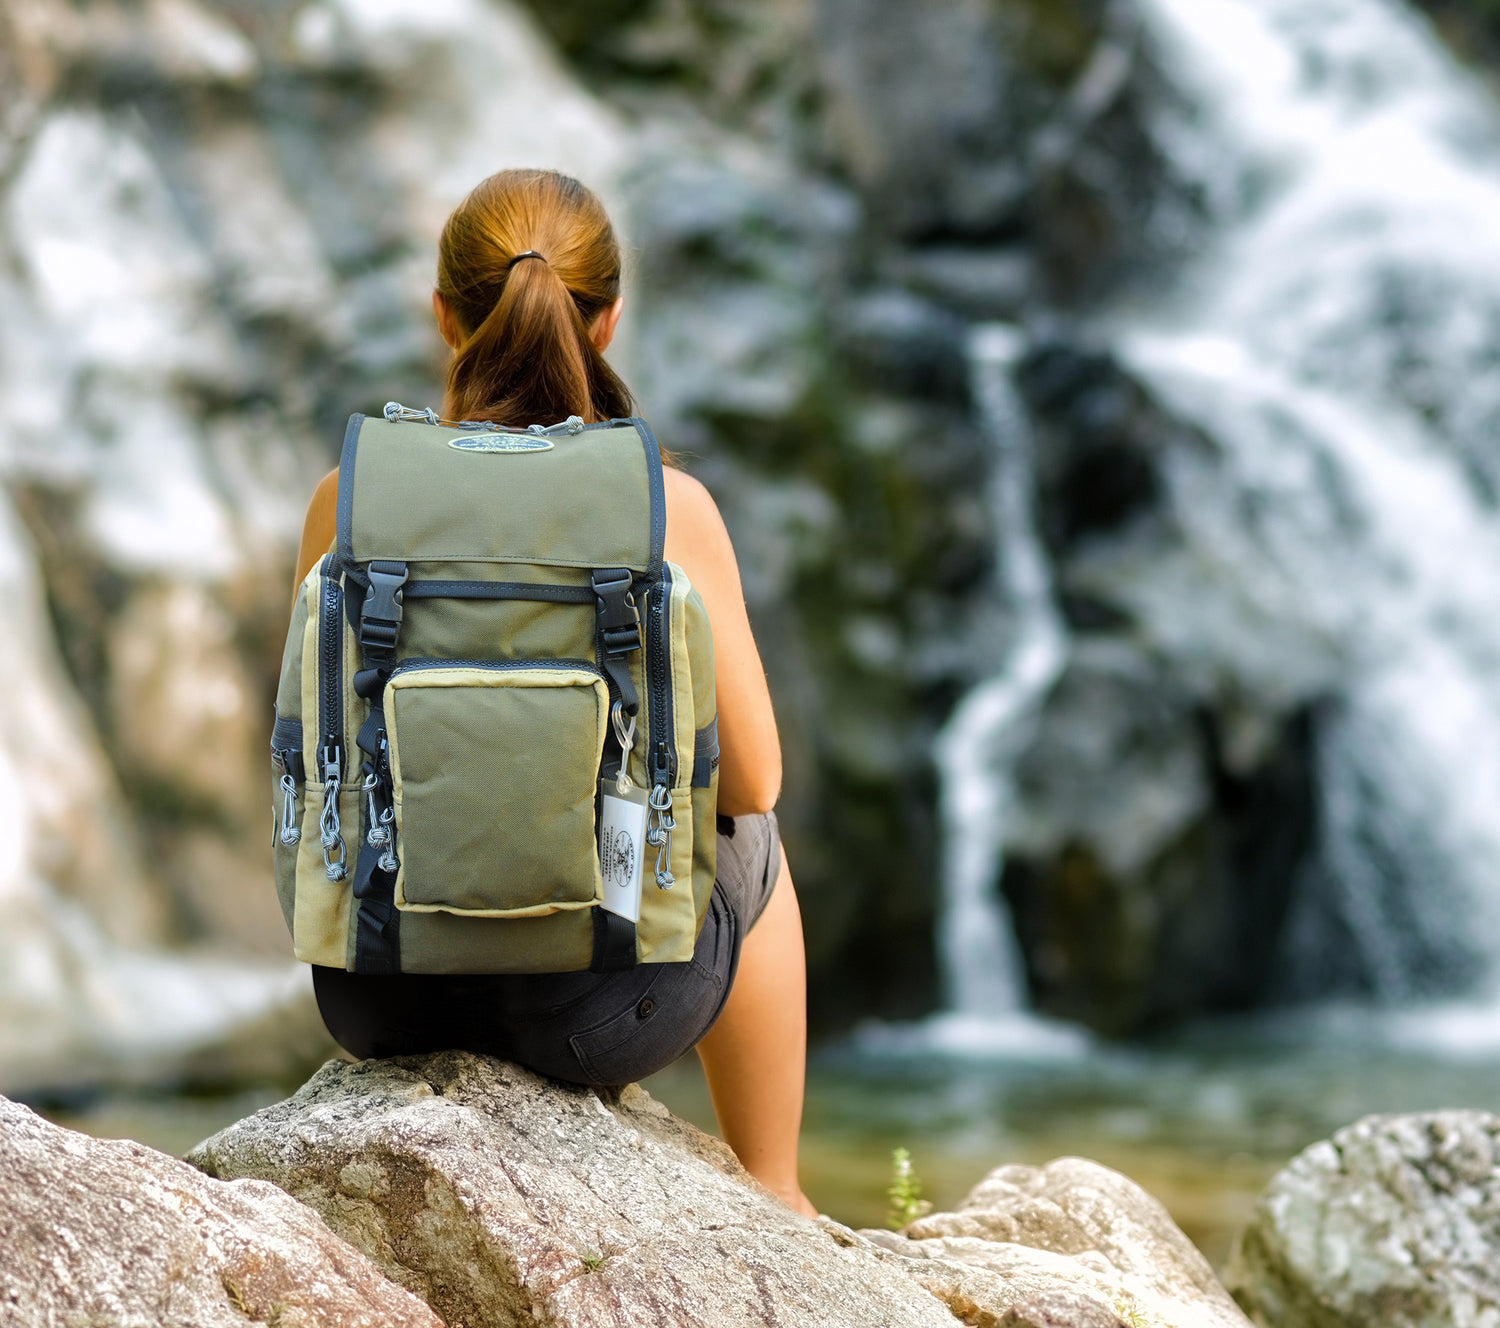 Dual Purpose Rucksack: Hiking Backpack and Carry-on